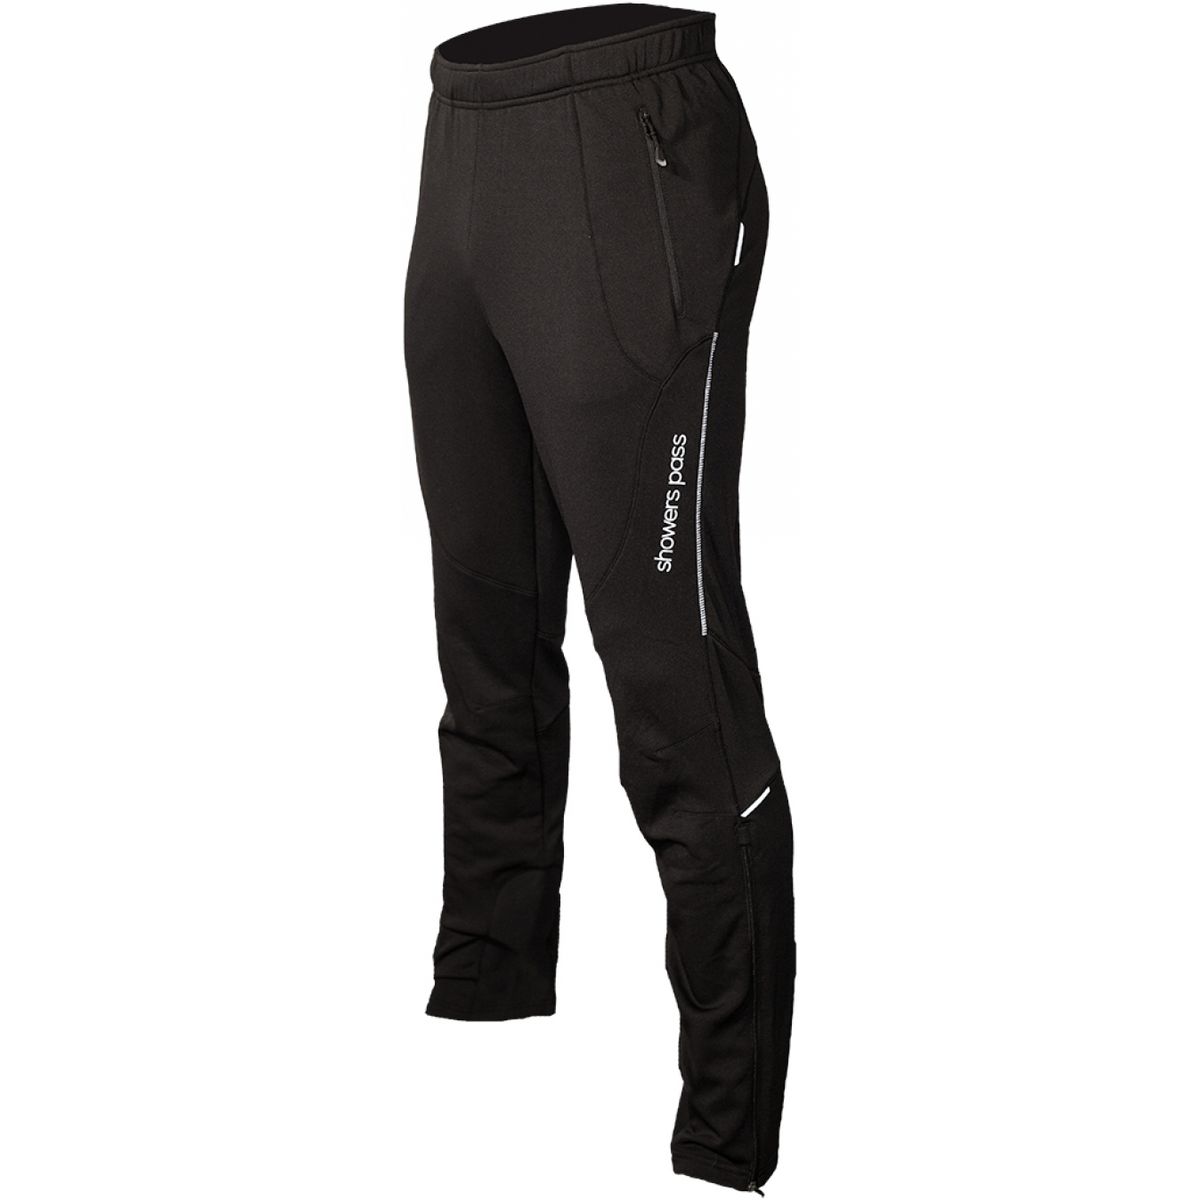 Showers Pass Track Pants Mens